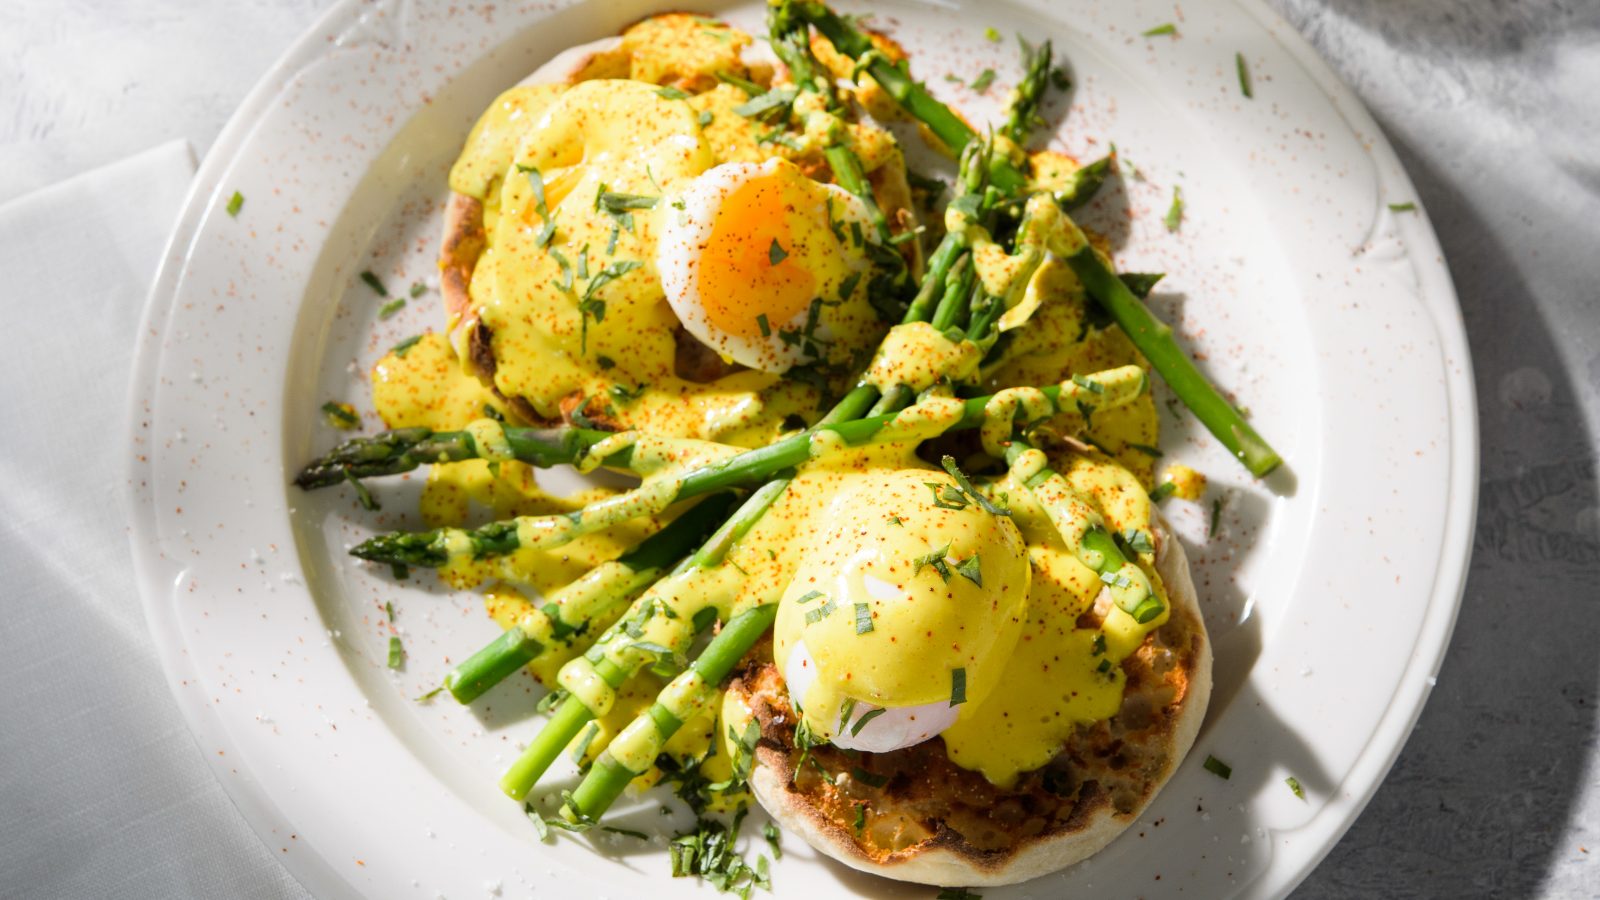 violin trug Astrolabe Best Sous Vide Eggs Benedict with Asparagus Recipe - How To Make Sous Vide  Eggs Benedict with Asparagus